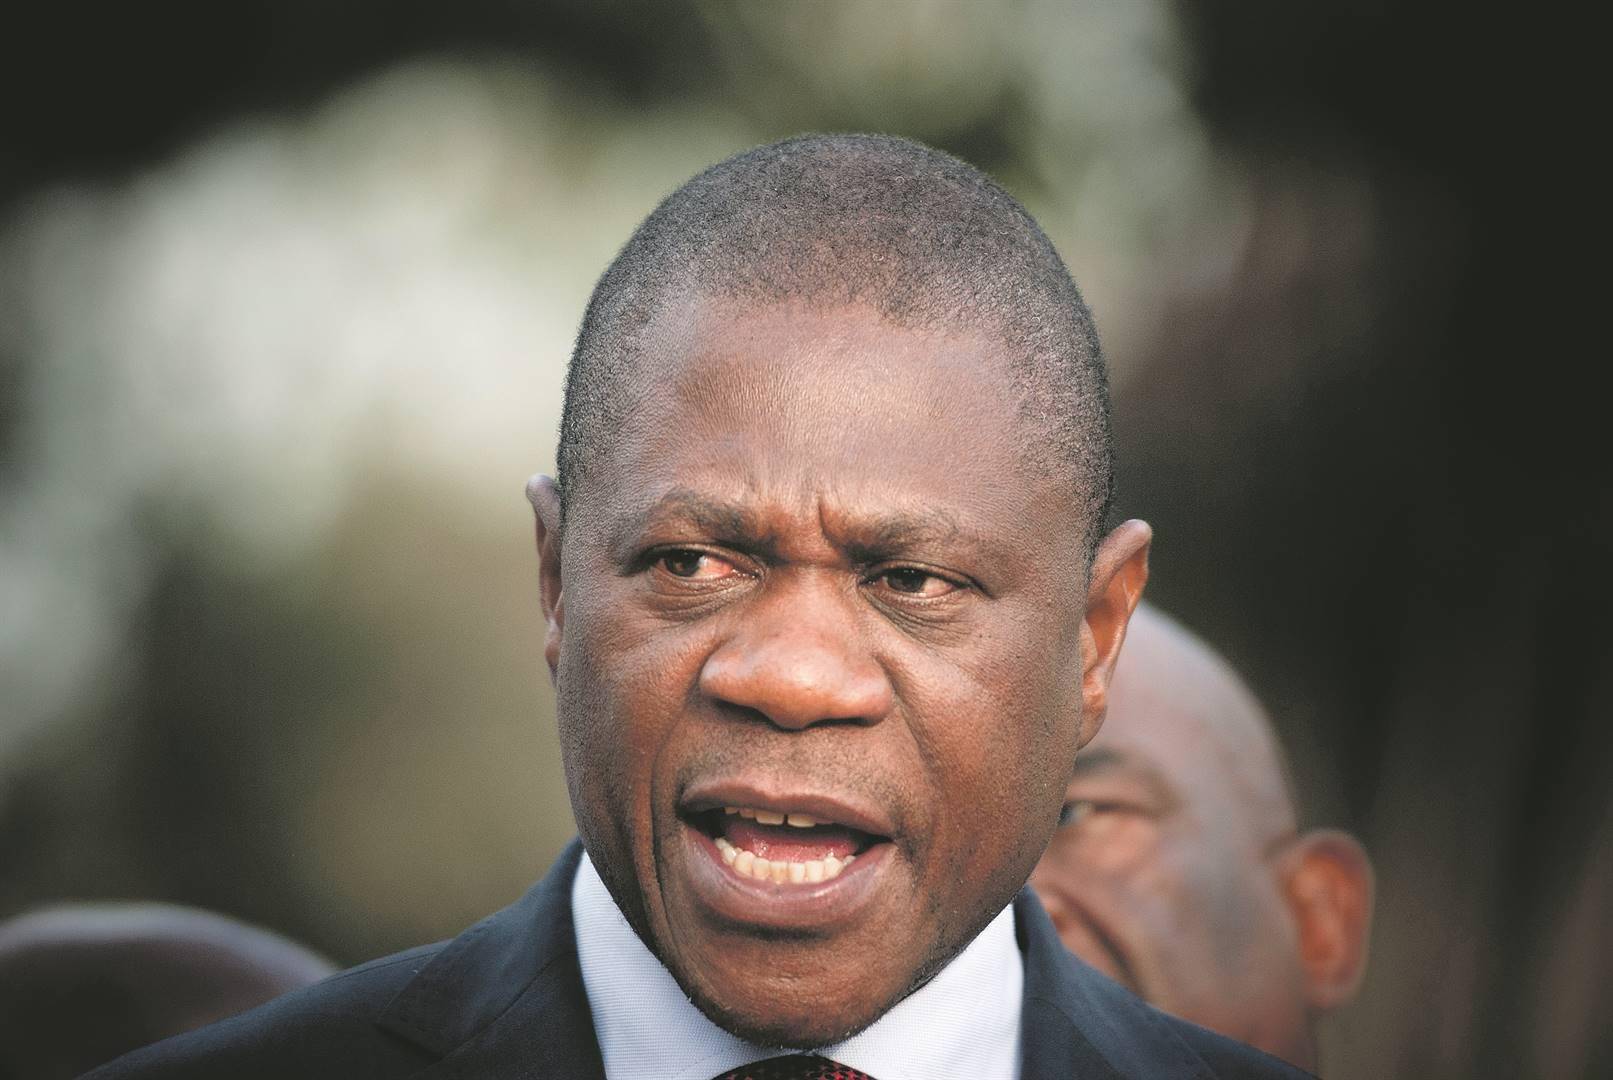 Deputy President Paul Mashatile will return to Parliament and face questions from lawmakers on Friday, 22 September.